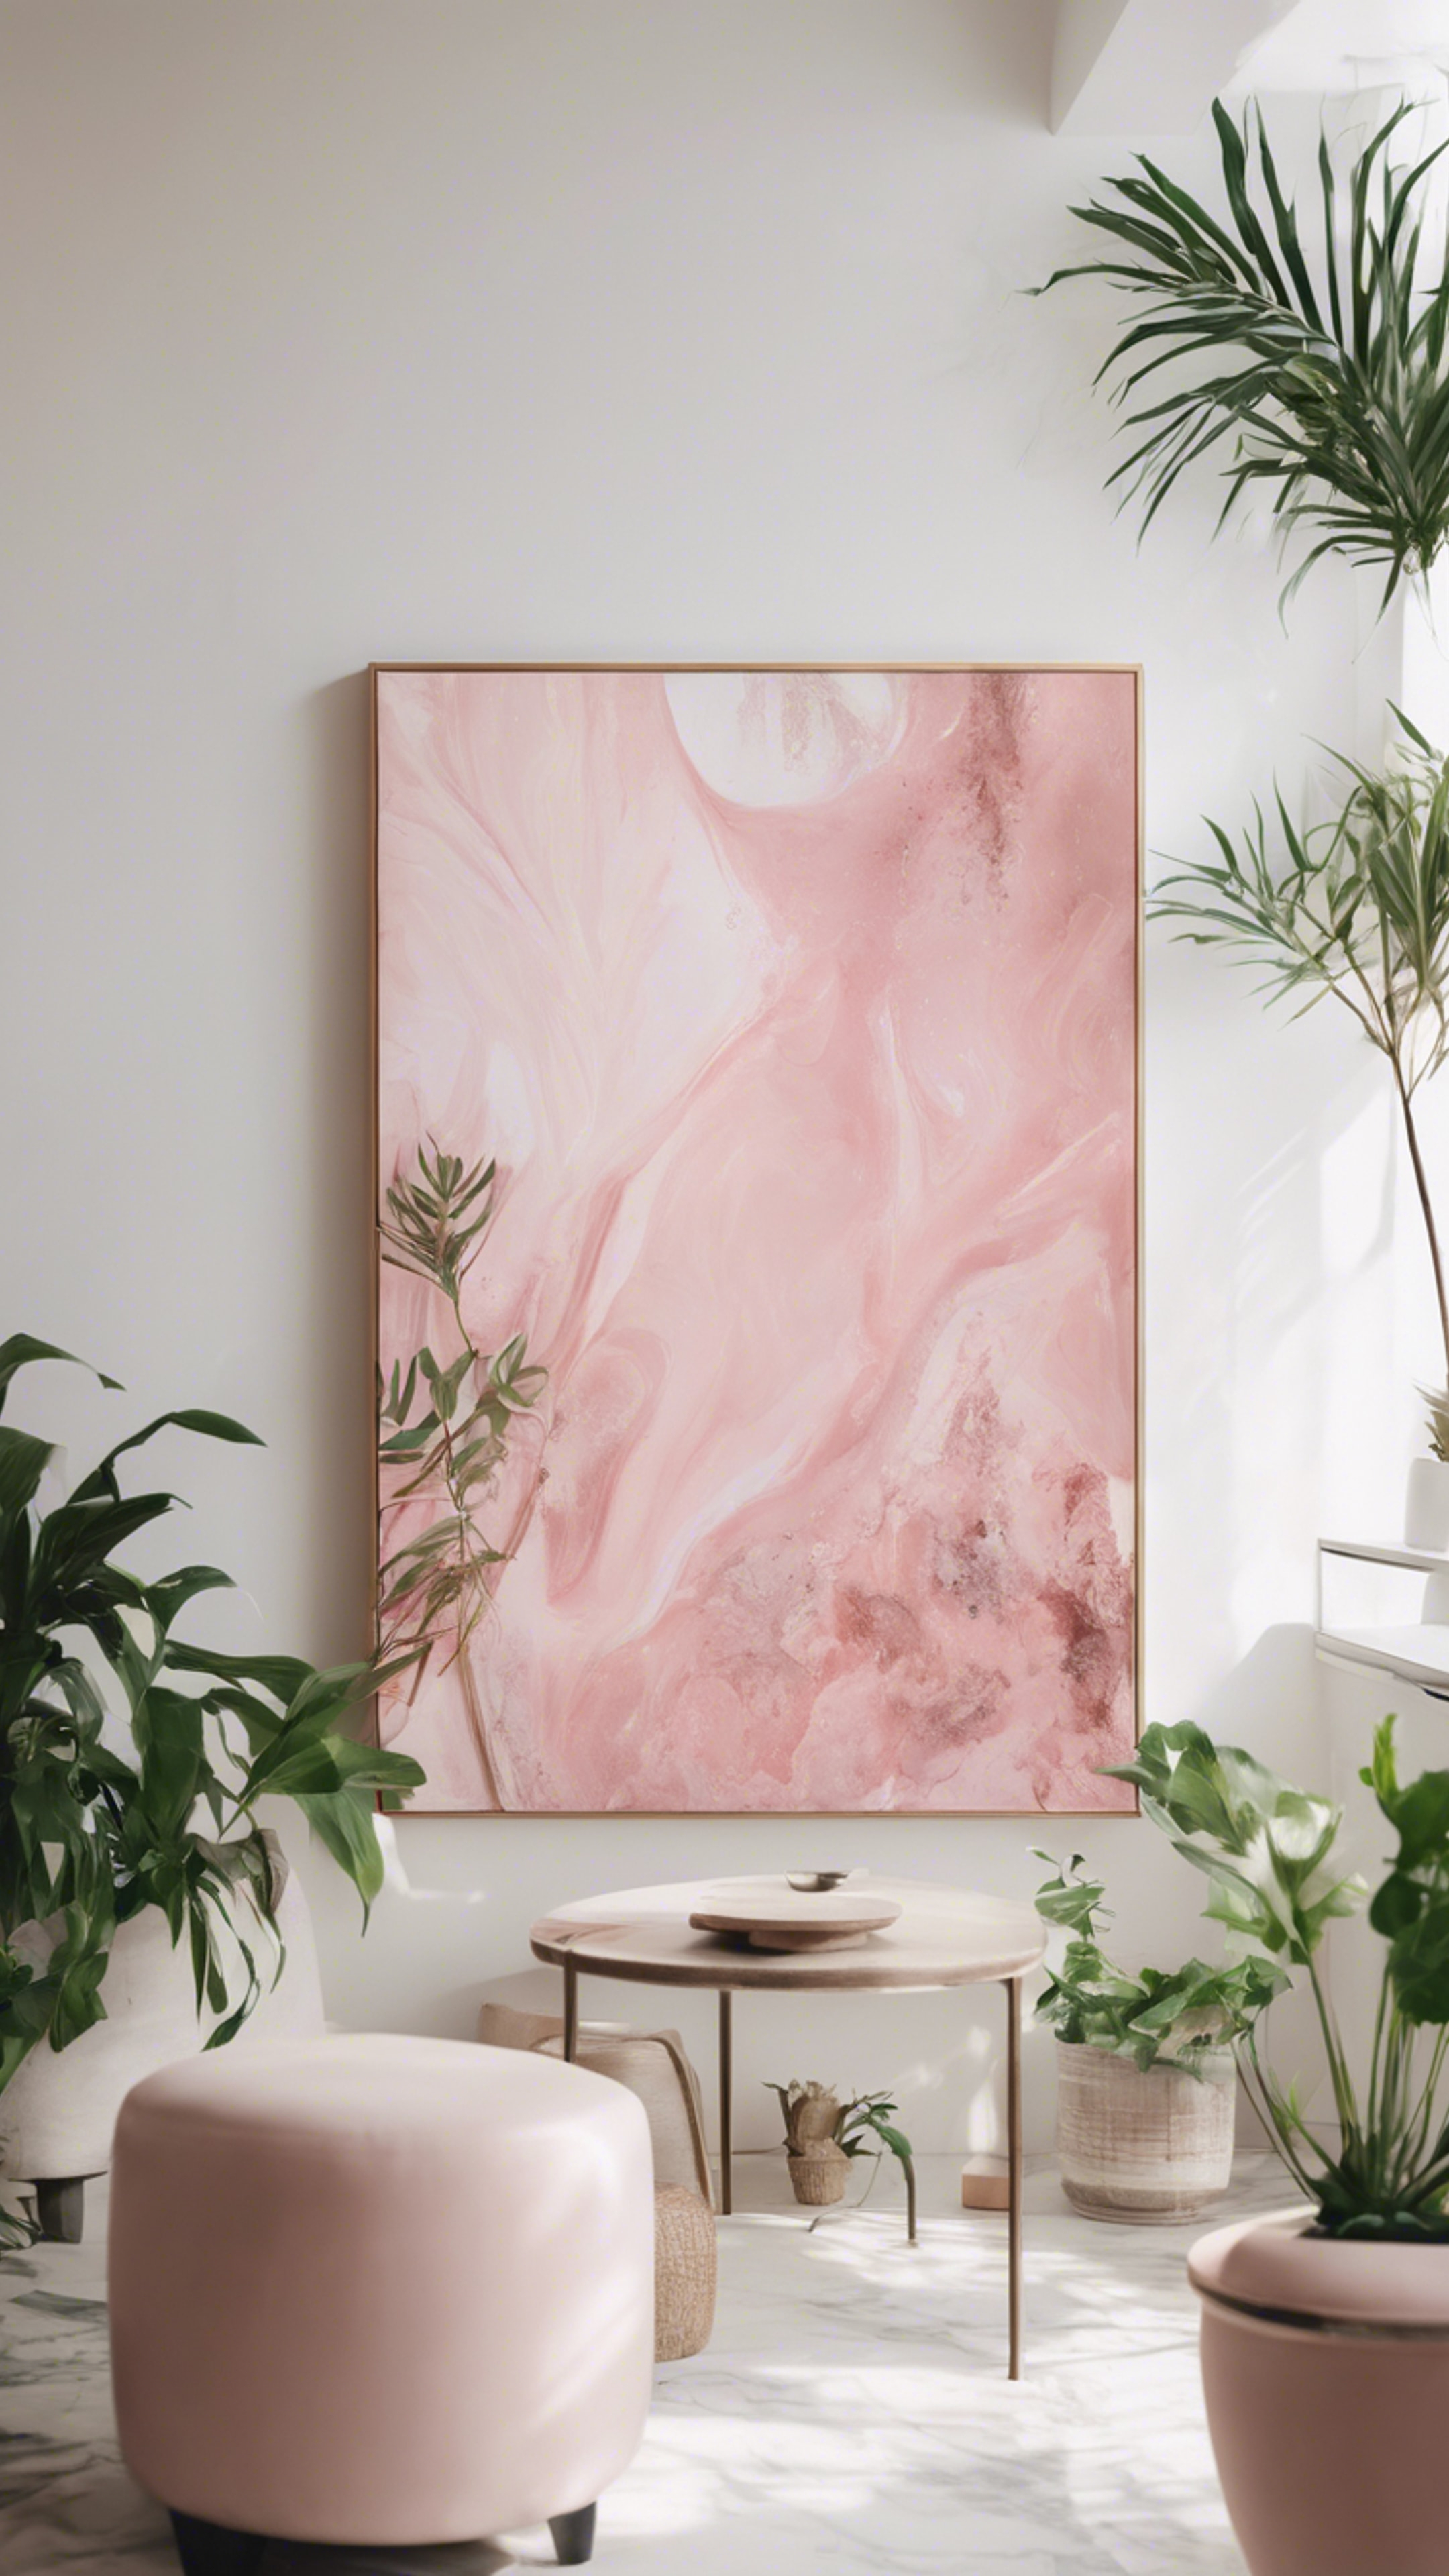 A soft pink abstract painting on a white wall surrounded by indoor plants, enhancing the aesthetic of the room ورق الجدران[9fa4f1f3650f4fbb9955]